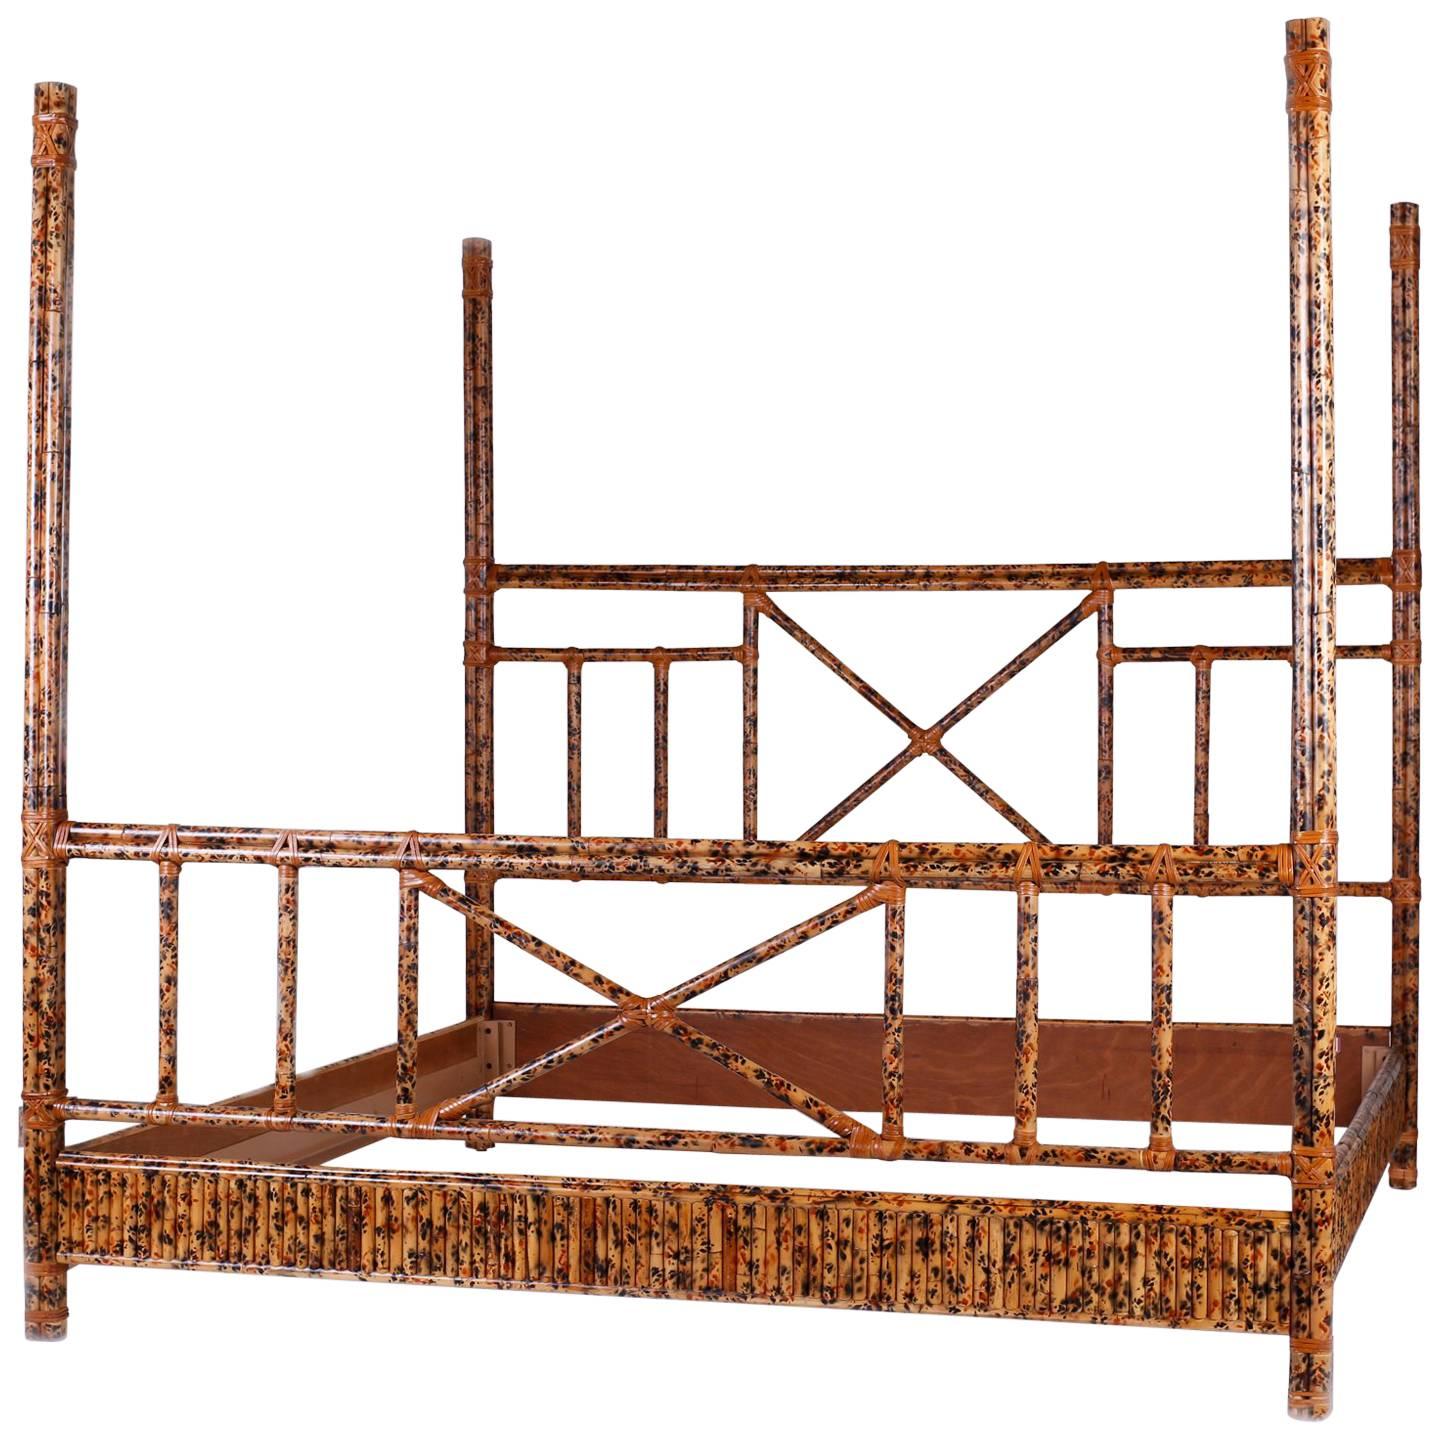 British Colonial Four-Poster King-Size Bed in Faux Bamboo